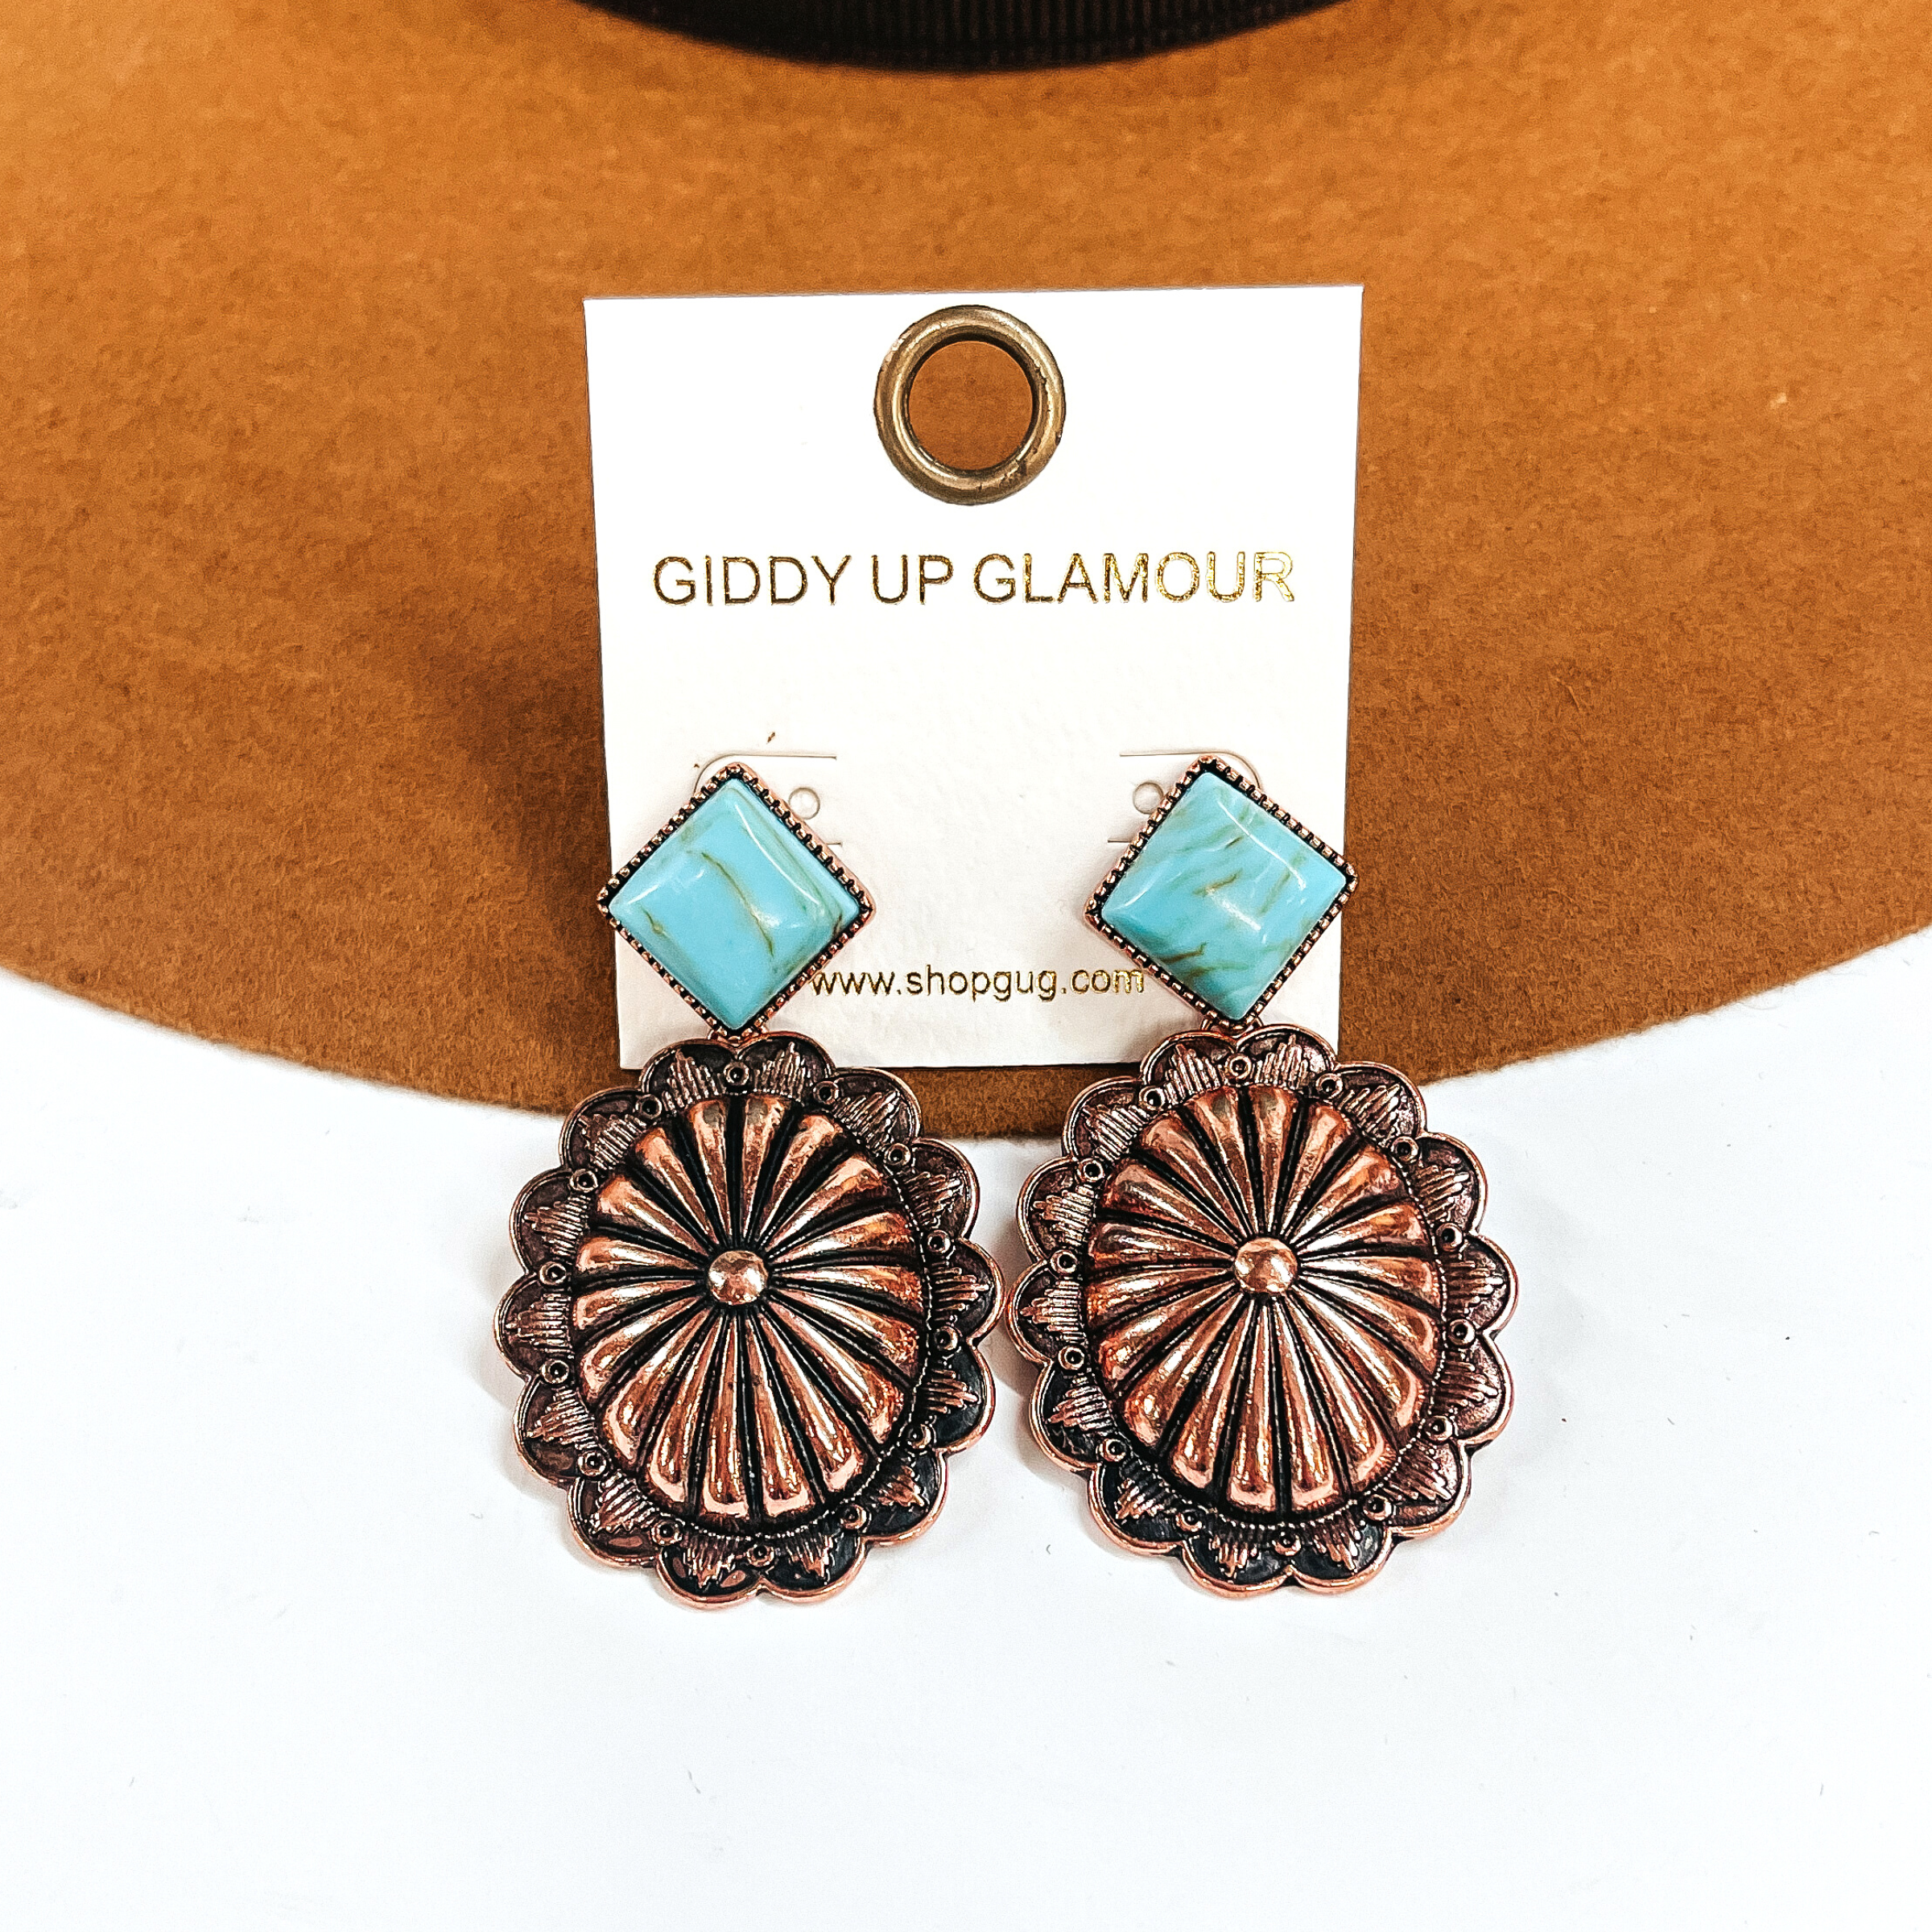 These are copper concho drop earrings with a turquoise-marble stone post in a copper  setting. These earrings are taken laying on a camel felt hat and on a white background.